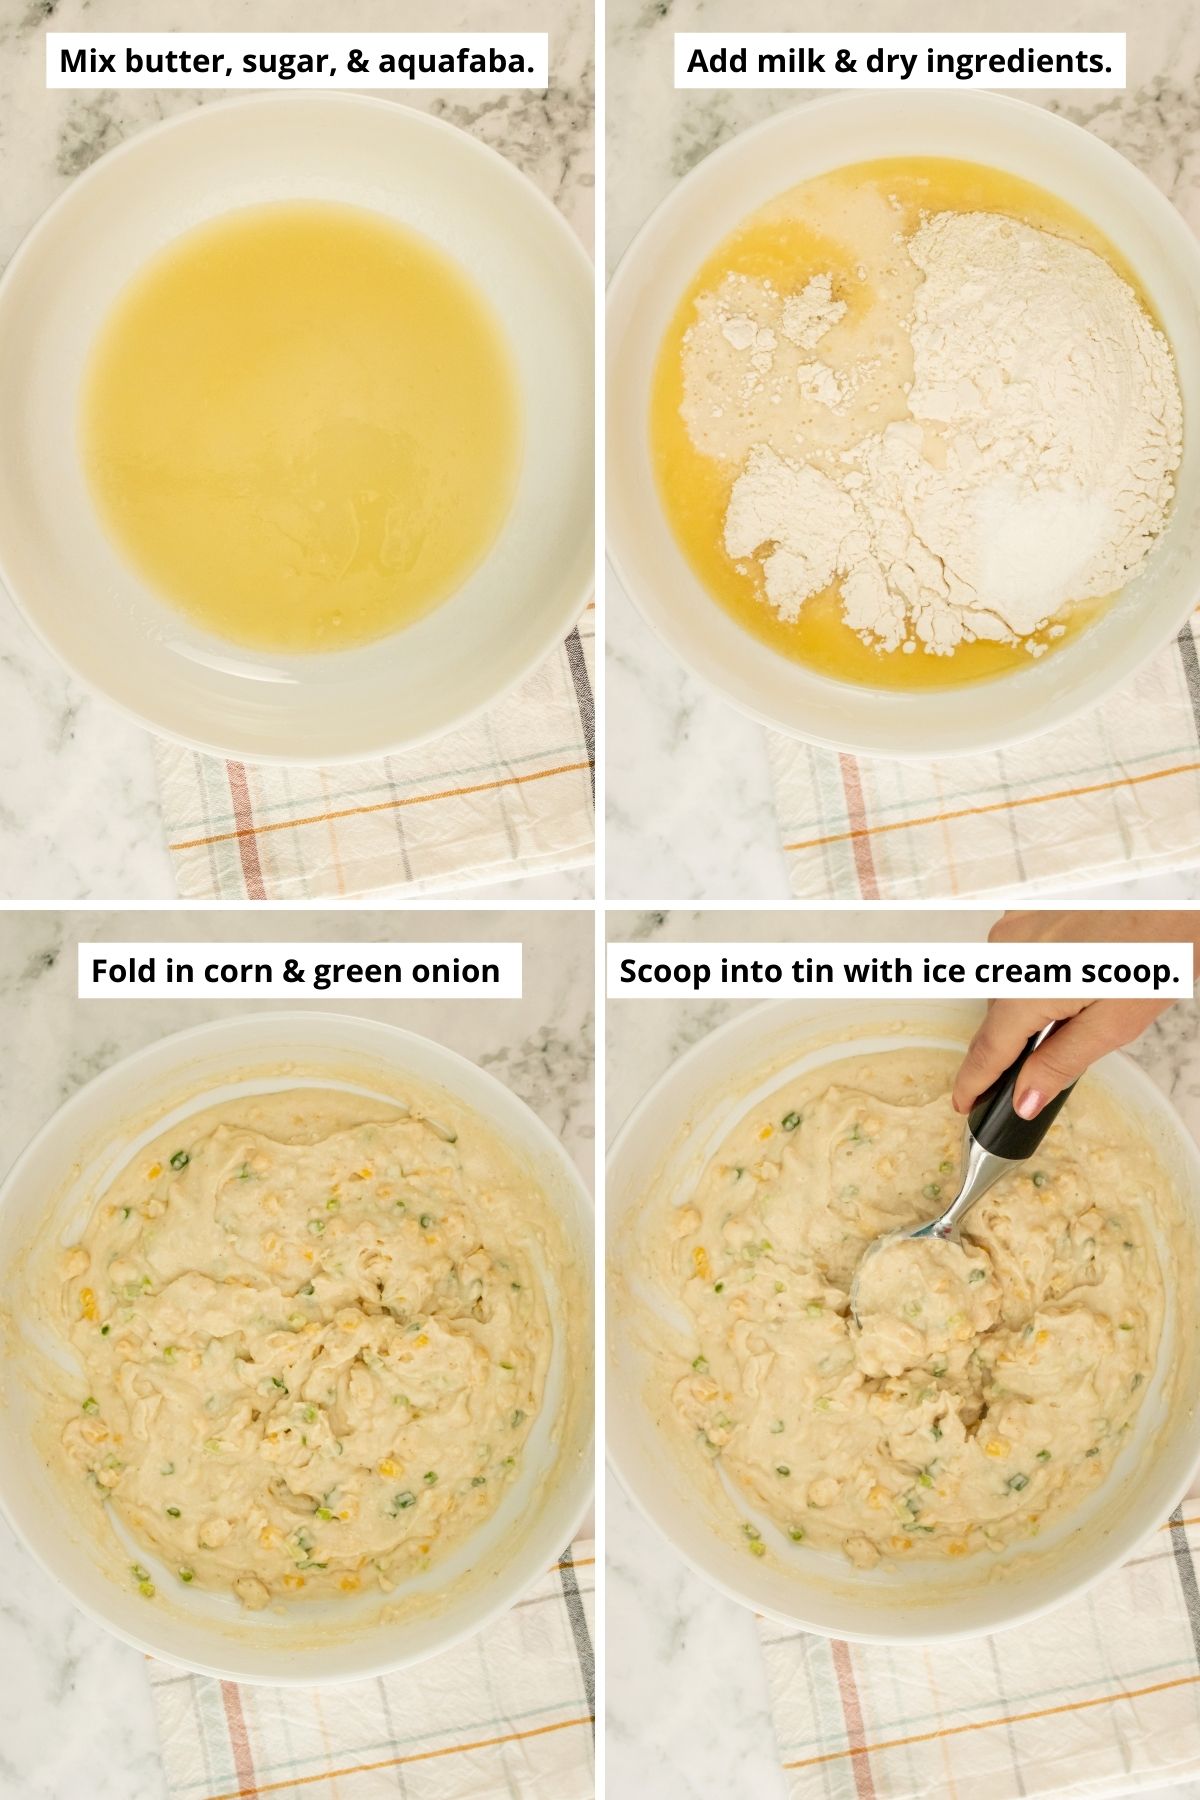 image collage showing mixing the wet ingredients, adding dry ingredients, mixed batter, and scooping the batter with an ice cream scoop